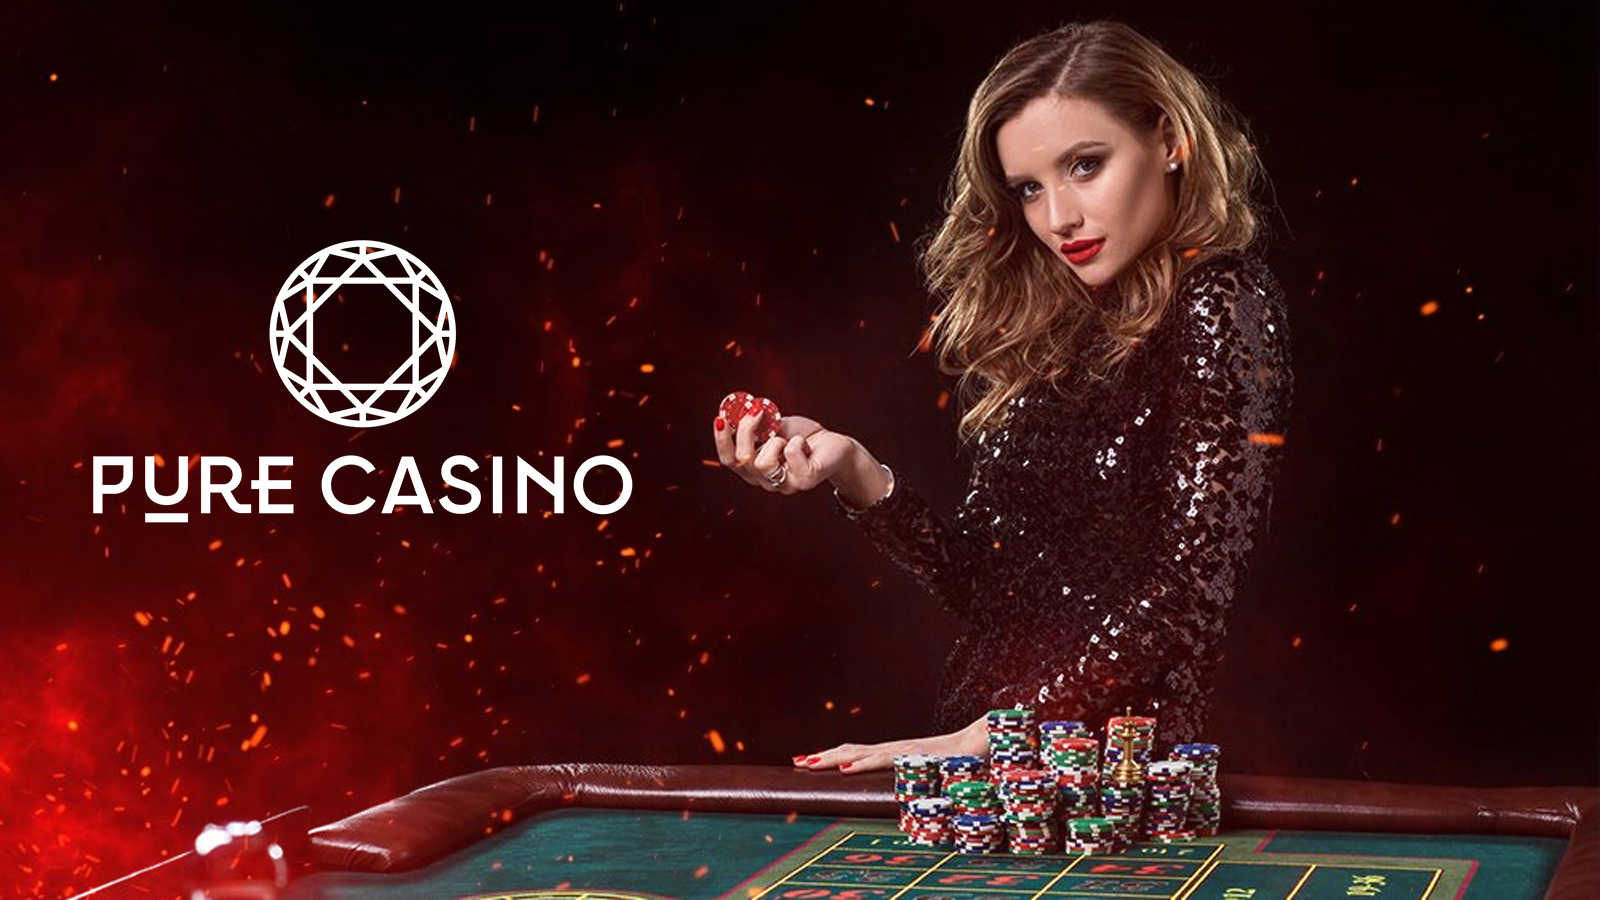 Play your favorite casino games in live section of Pure Casino.